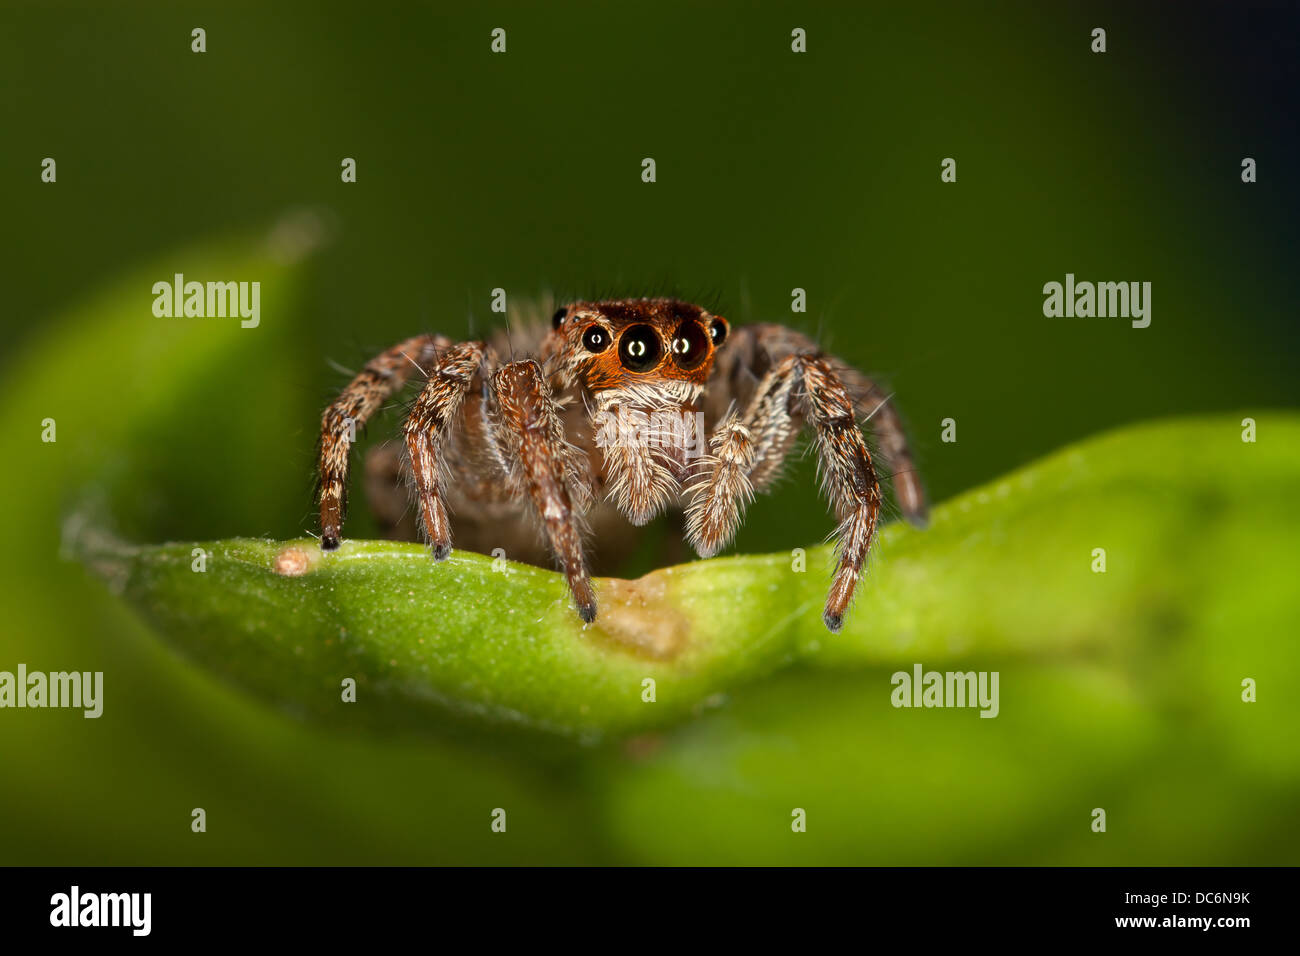 A Jumping Spider on a Green Leaf Stock Photo